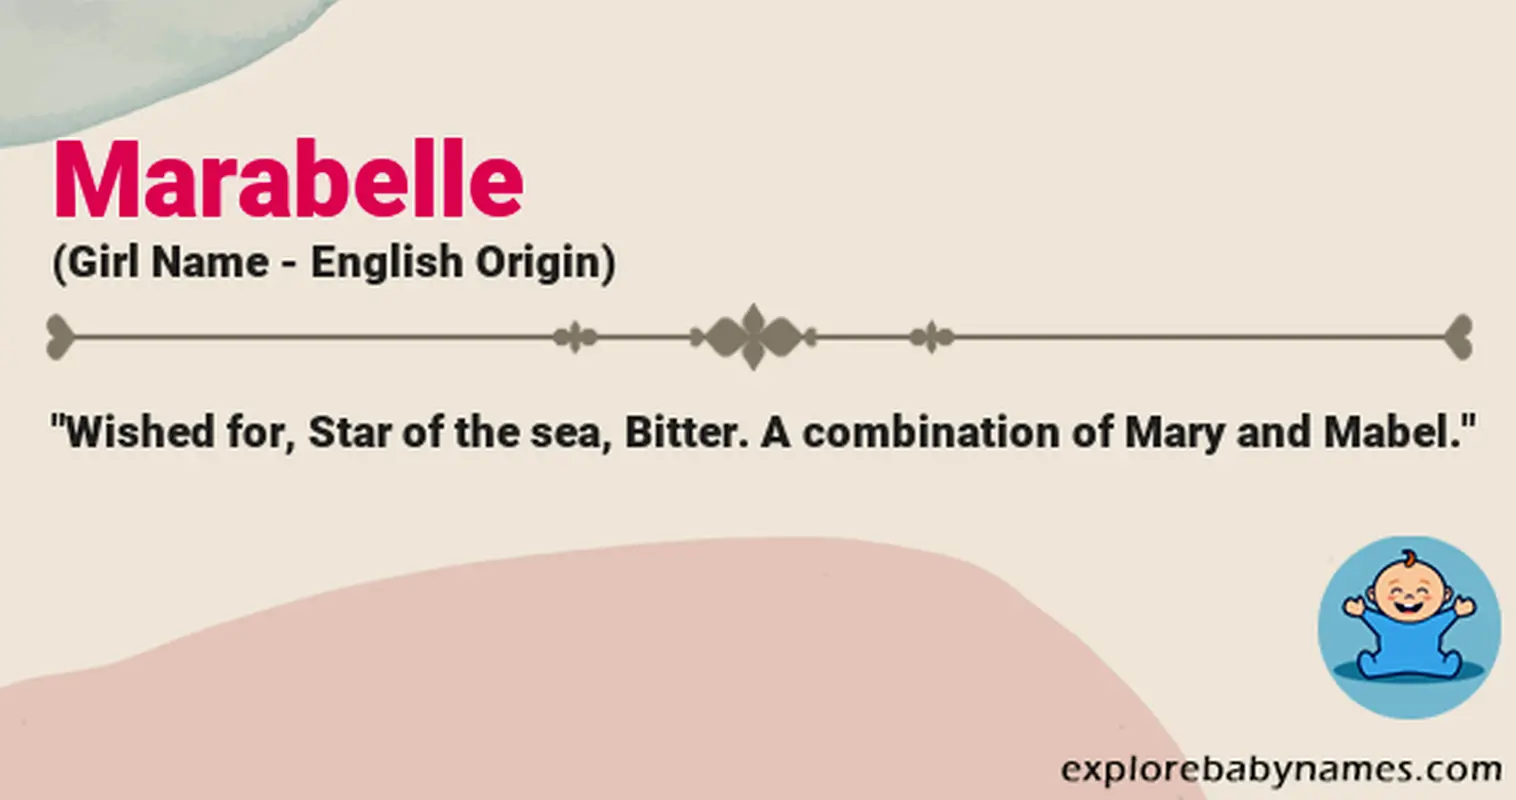 Meaning of Marabelle